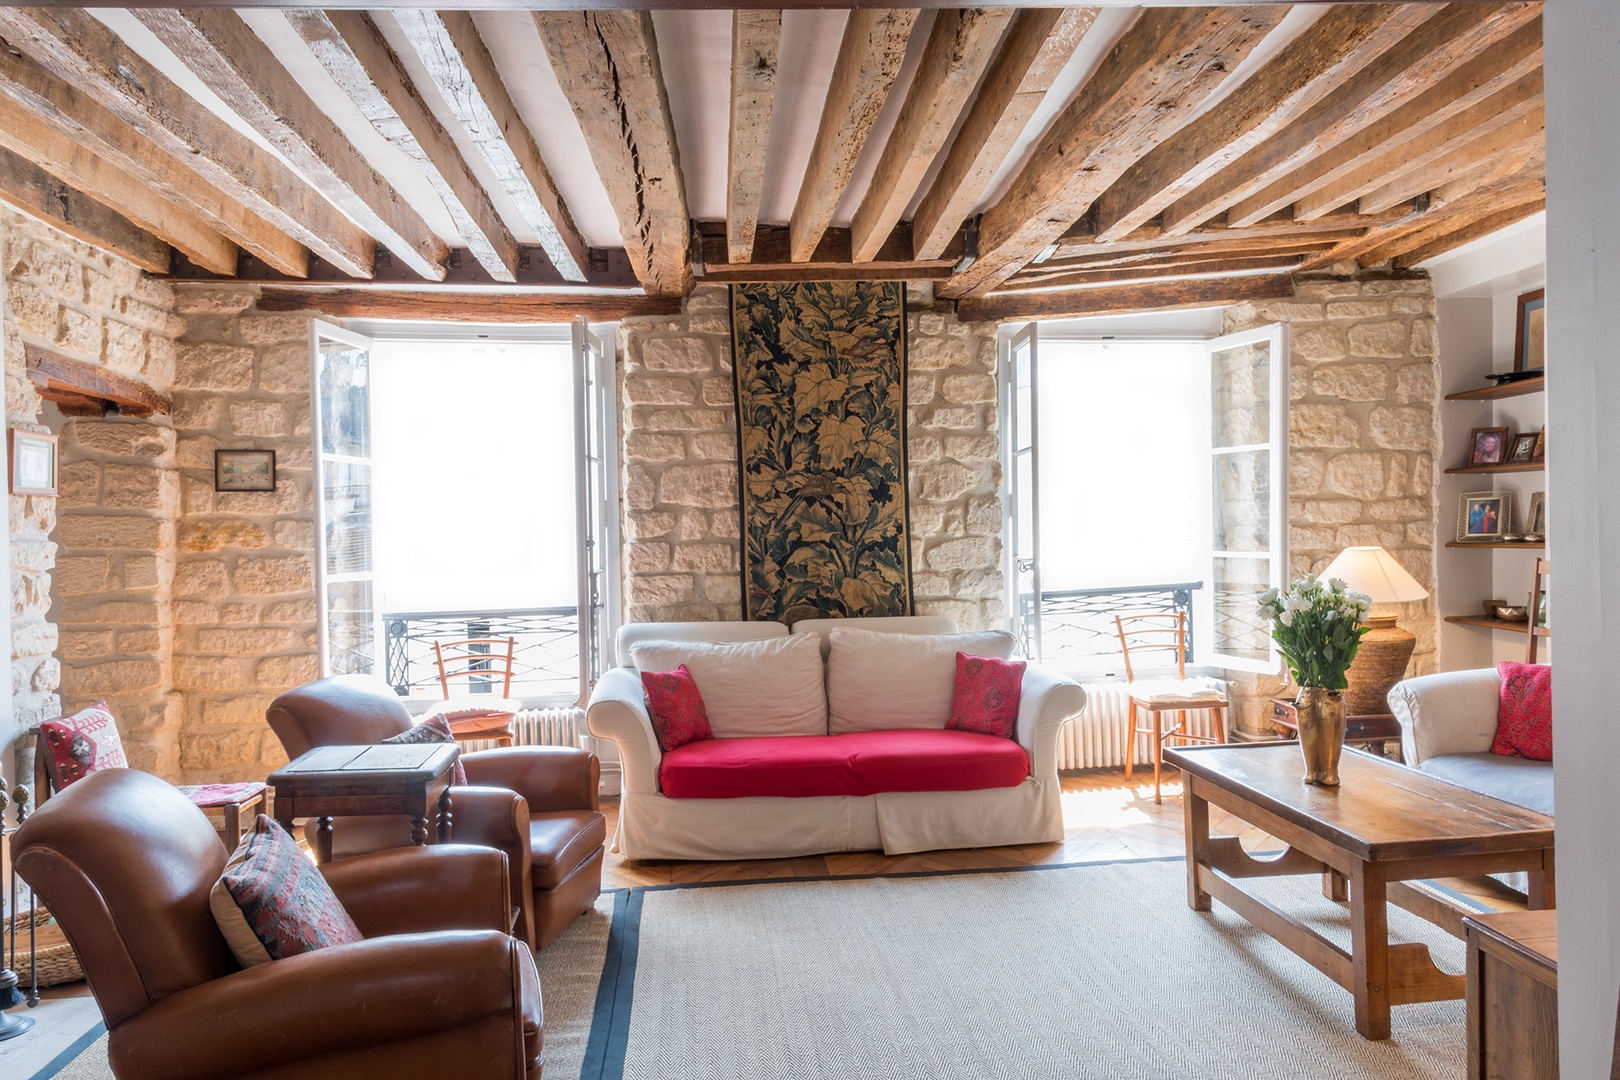 Spend relaxing evenings at home in this cozy Paris rental.